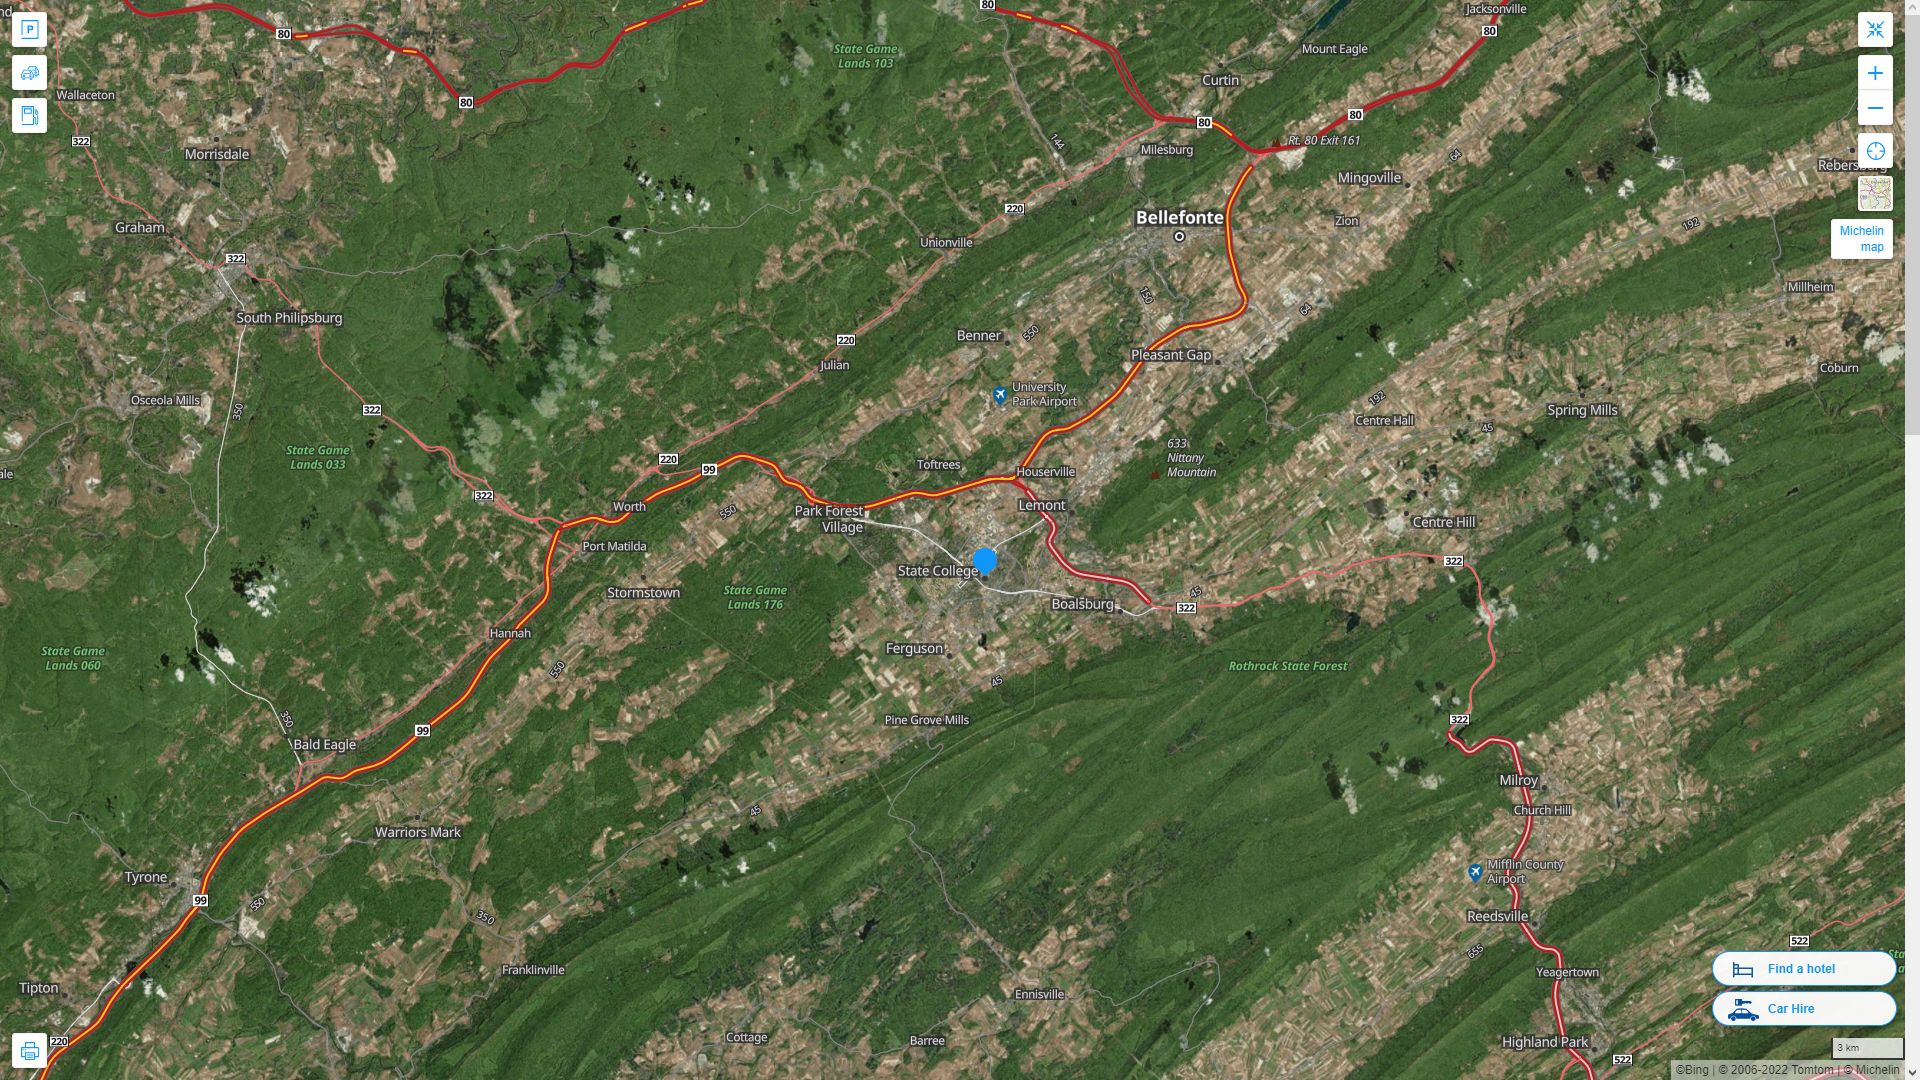 State College Pennsylvania Highway and Road Map with Satellite View